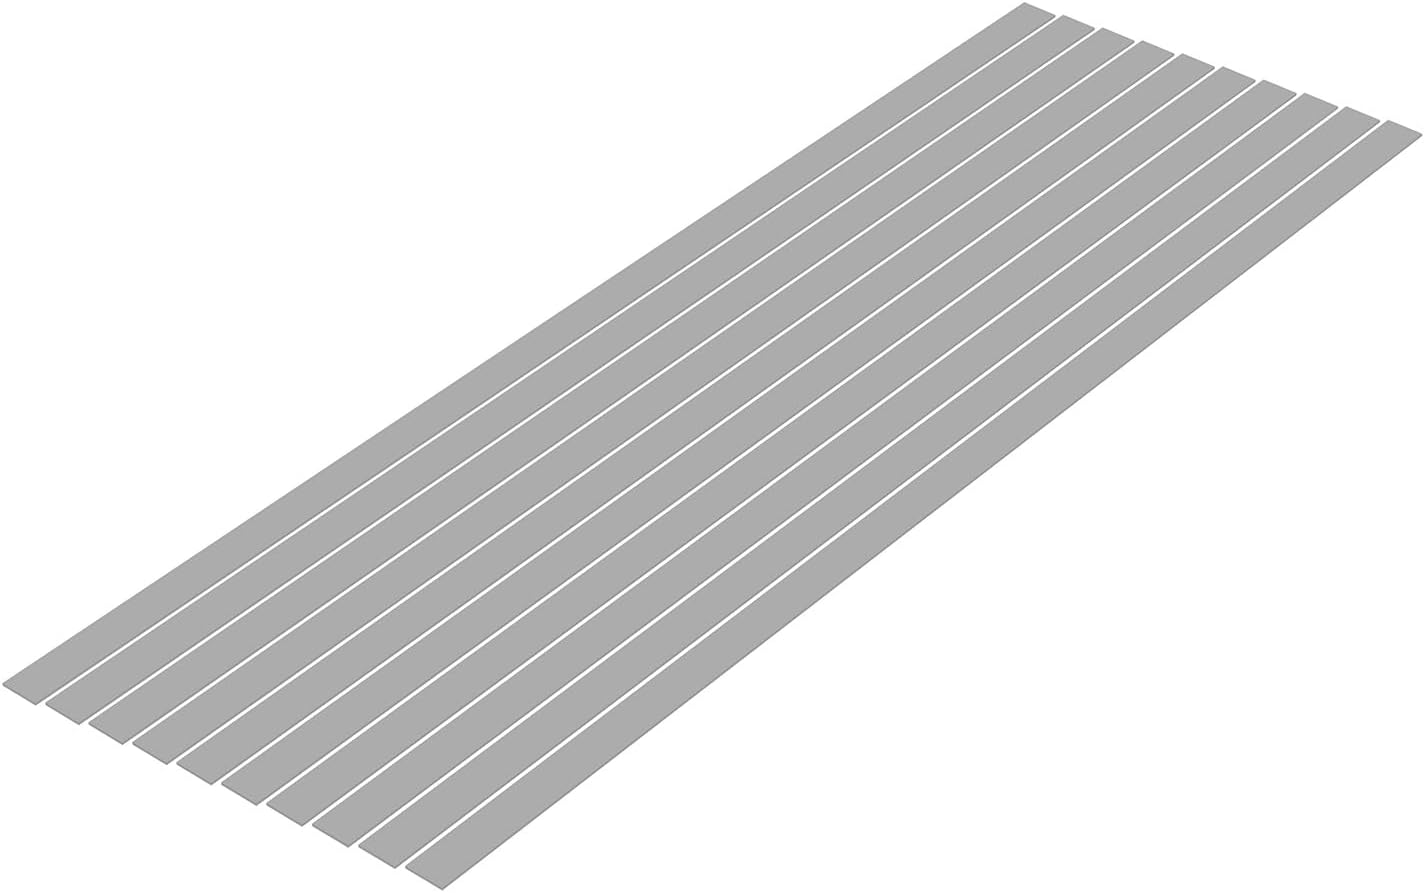 Wave Material Series OM-477 Plastic Material, Gray, Shredded Board, 0.02 x 0.28 inches (0.5 x 7.0 mm), 10 Pieces, Hobby Material - BanzaiHobby